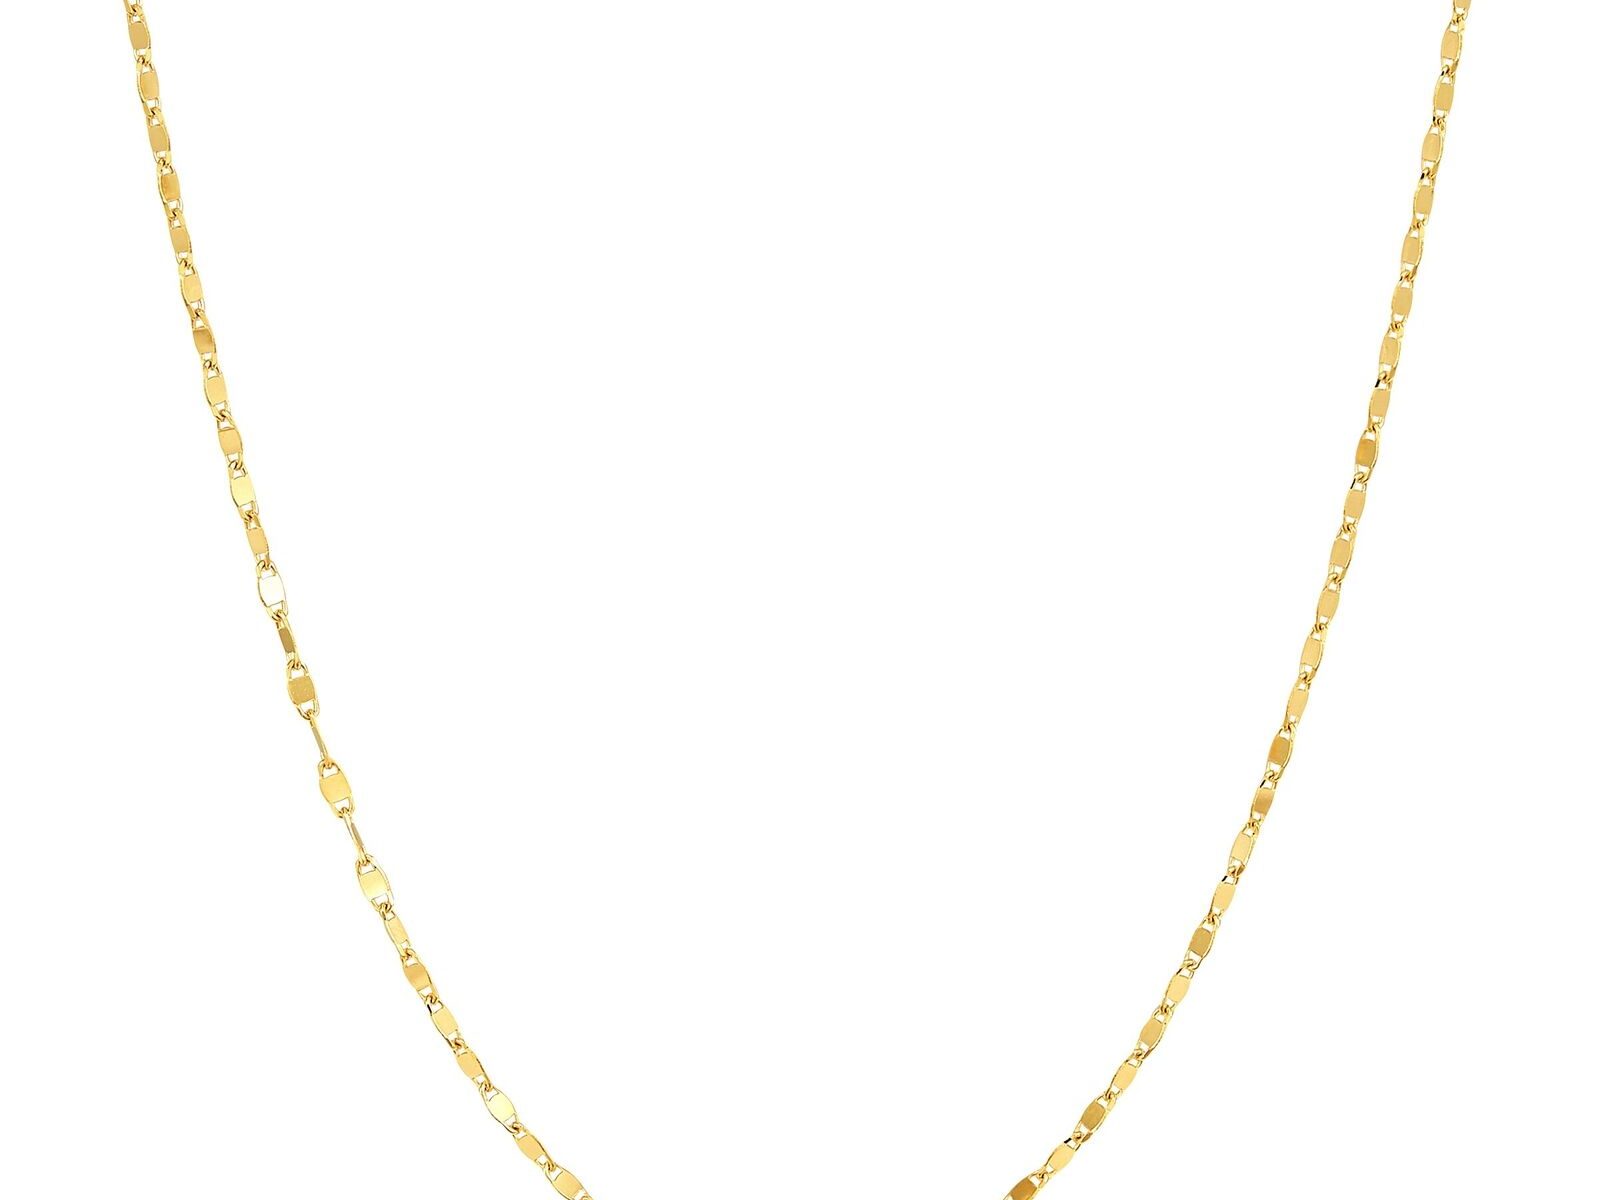 Valentino Link Chain Necklace in 14K Gold, 18"